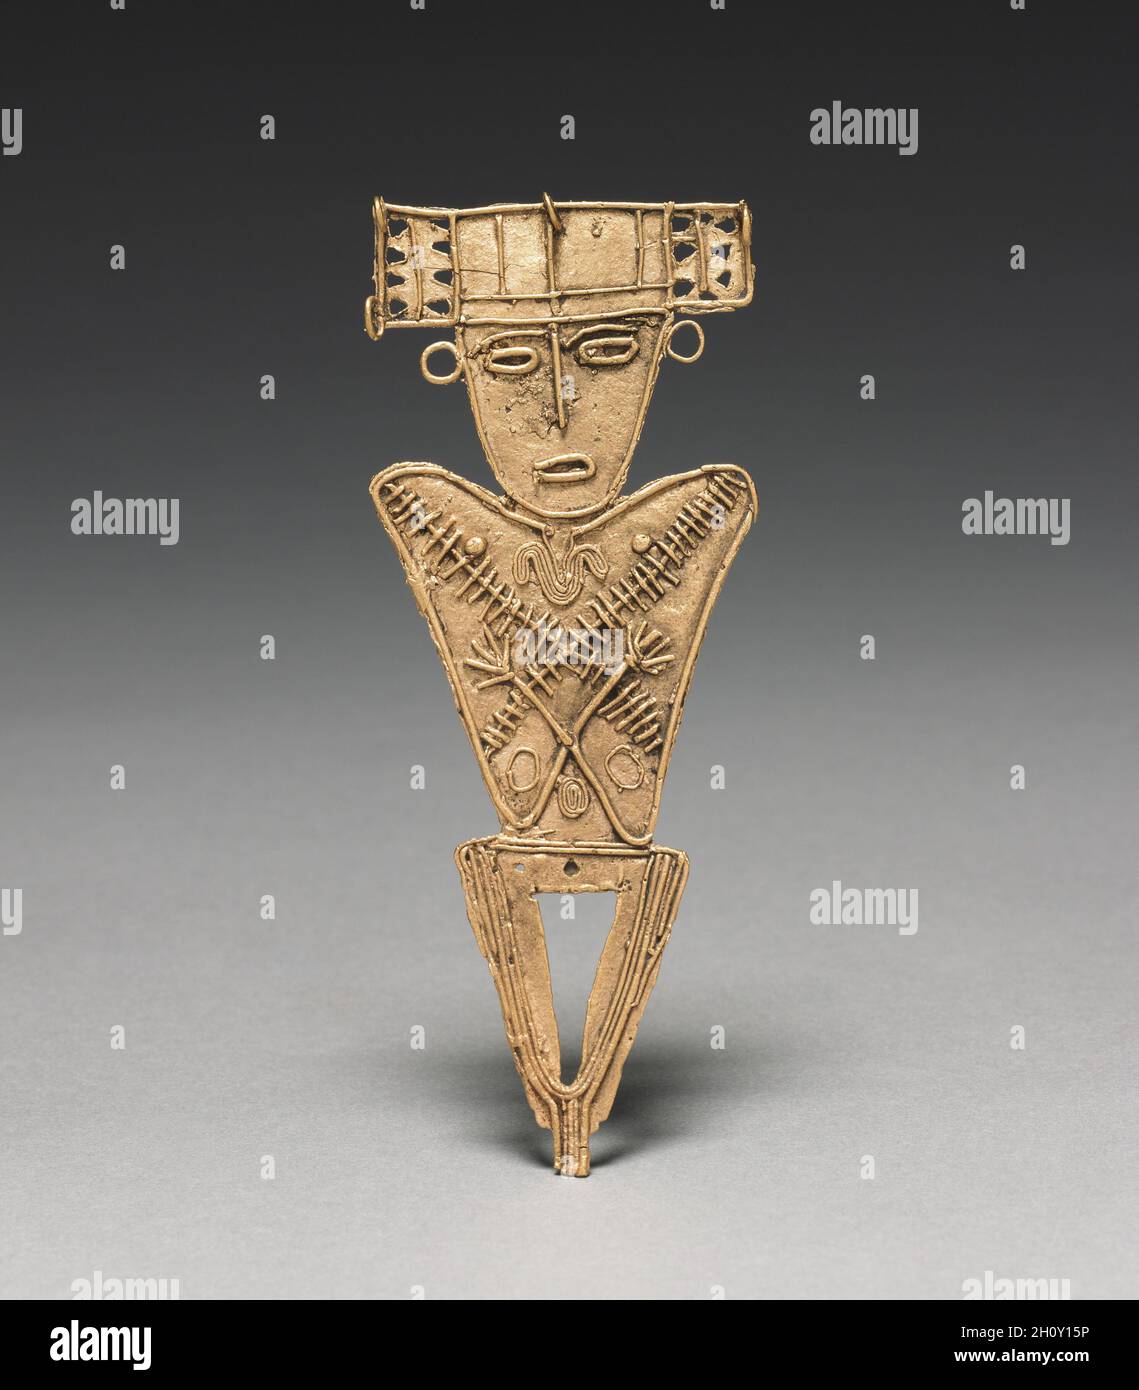 Tunjos (Votive Offering Figurine), c. 900-1550. Colombia, Muisca style, 10th-16th century. Cast gold; overall: 12.9 x 5.1 x 0.6 cm (5 1/16 x 2 x 1/4 in.).  Unlike the other gold ornaments made in the isthmian region, tunjos were not worn; instead, they served as offerings that were deposited in sacred places such as lagoons and caves. They often depict humans who hold something. Perhaps because they were not meant for display, tunjos were not finished after lost-wax casting. Flaws remain uncorrected, surfaces are unpolished, and gold that backed into the channel used to pour the molten metal i Stock Photo